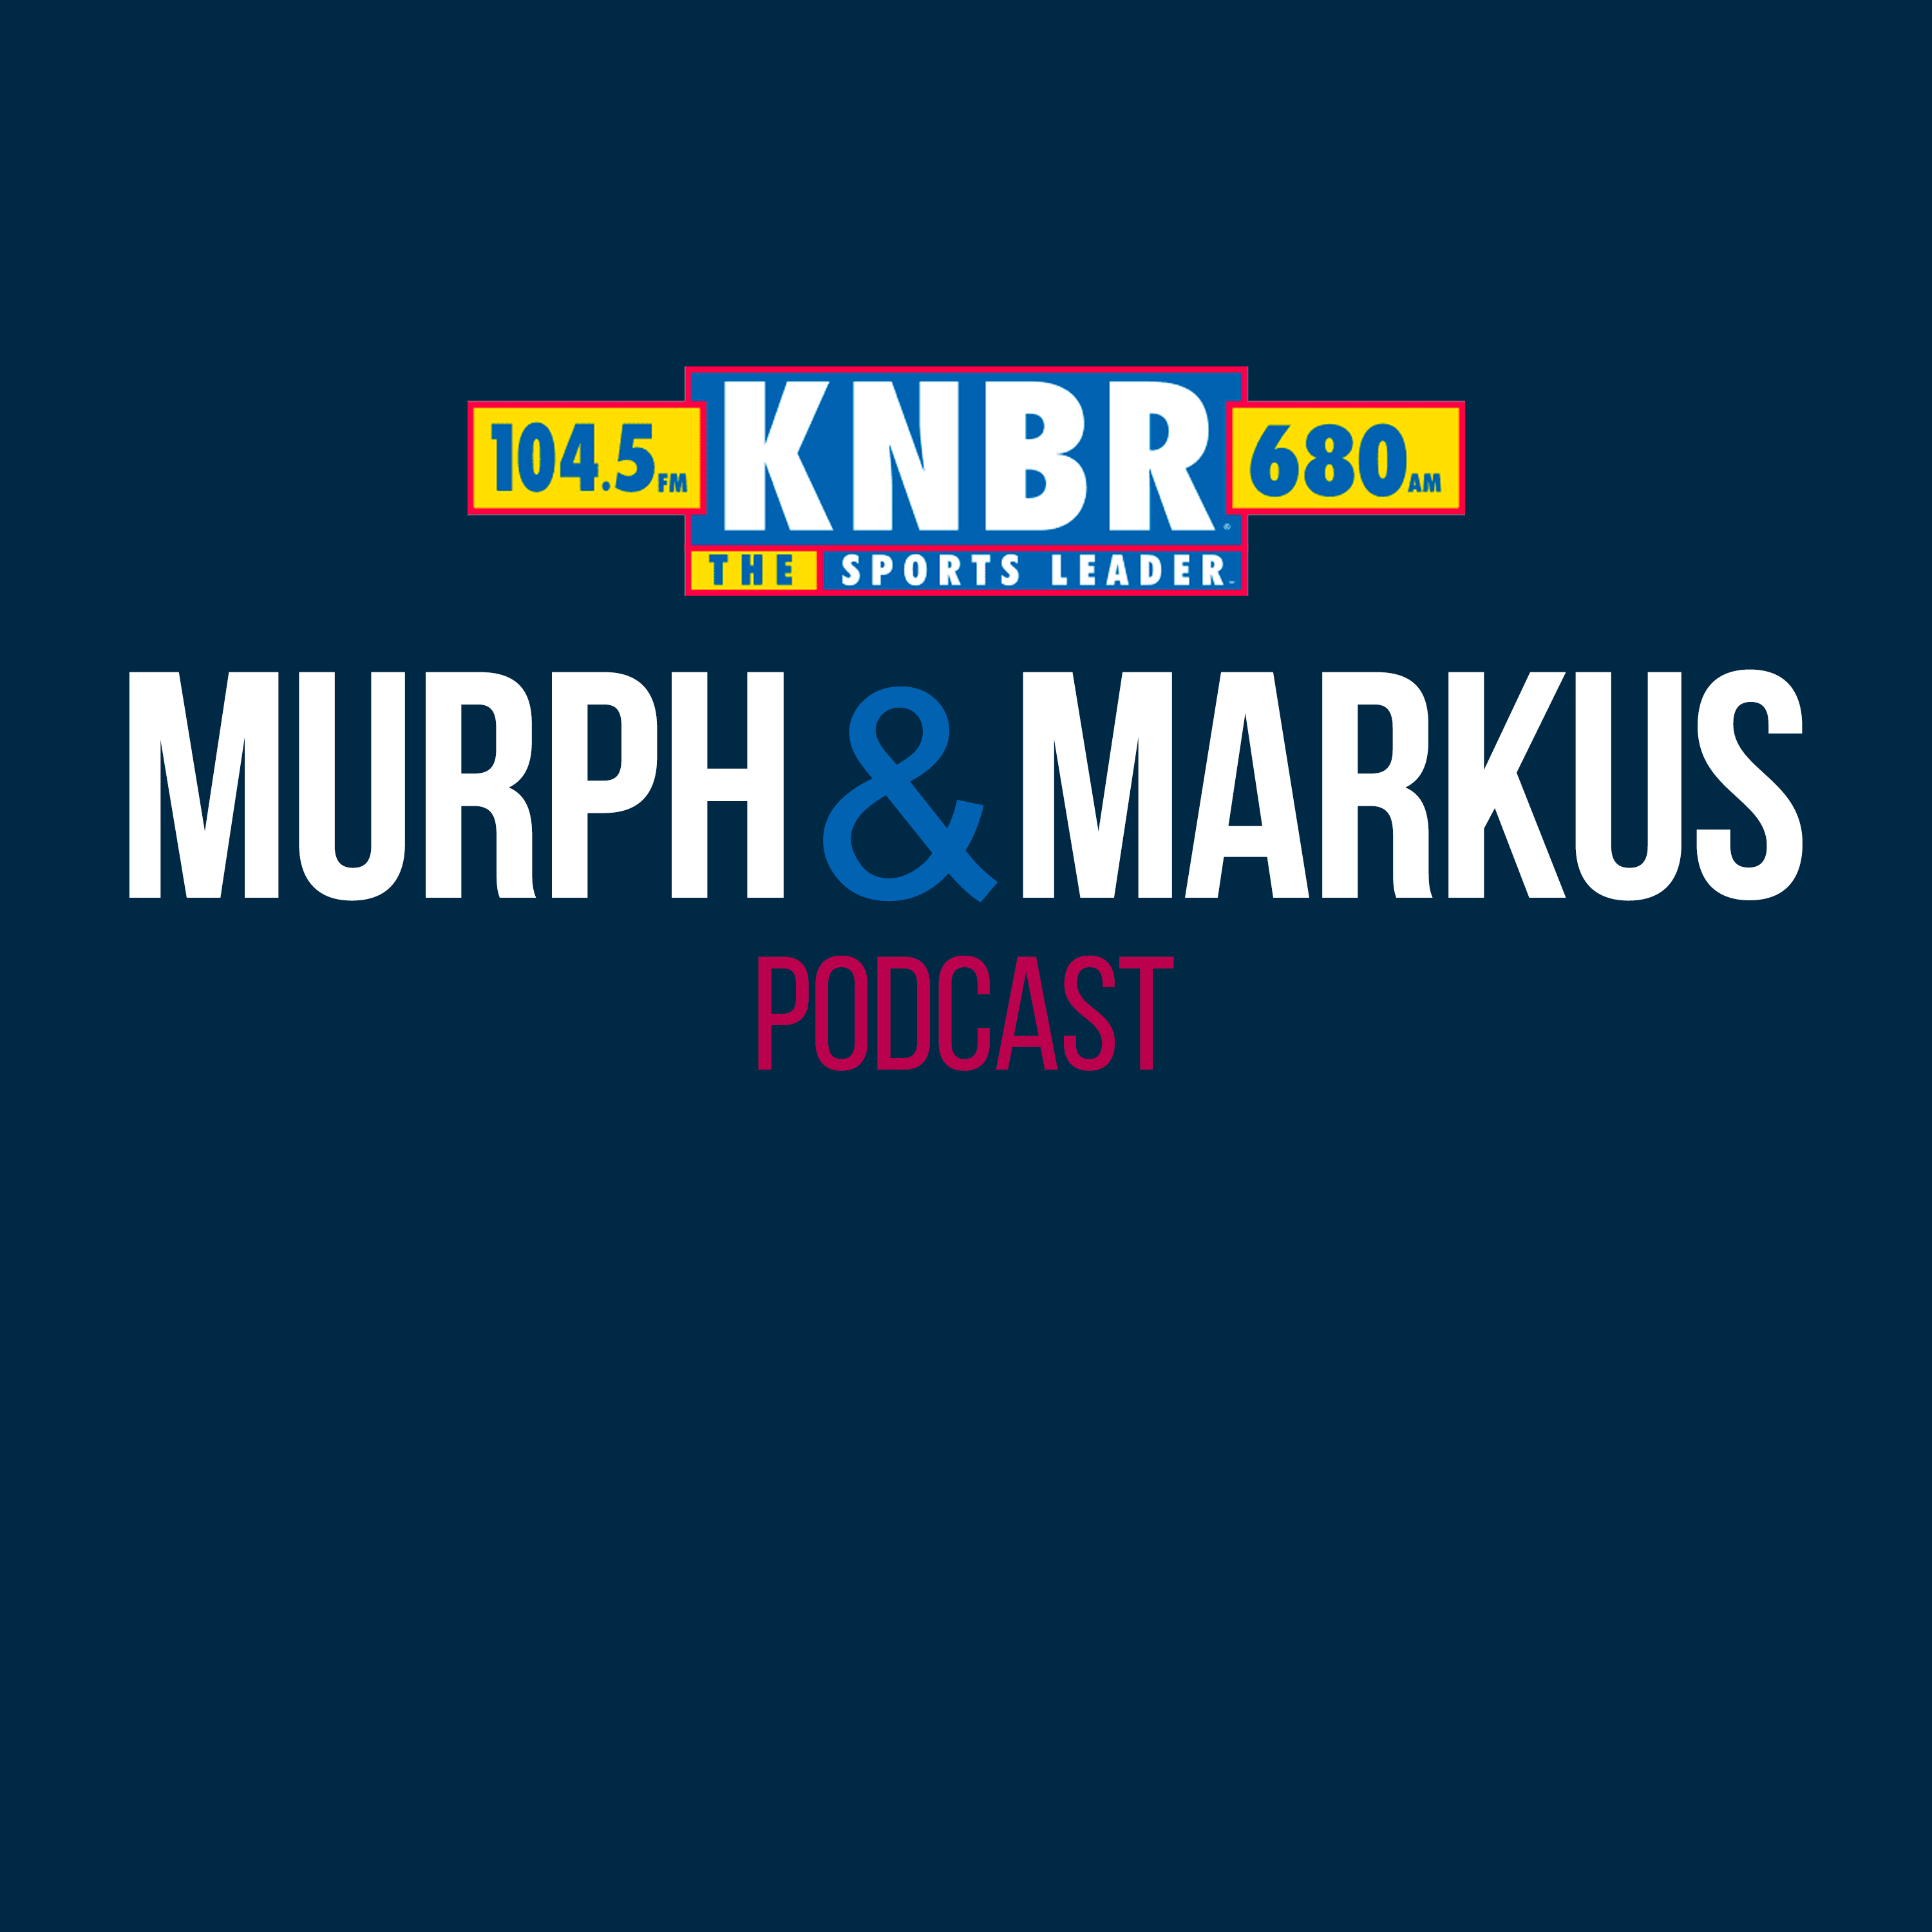 4-2 Duane Kuiper joins Murph & Markus to give his perspective on the first handful of Giants games this season and to discuss the consistent lineup